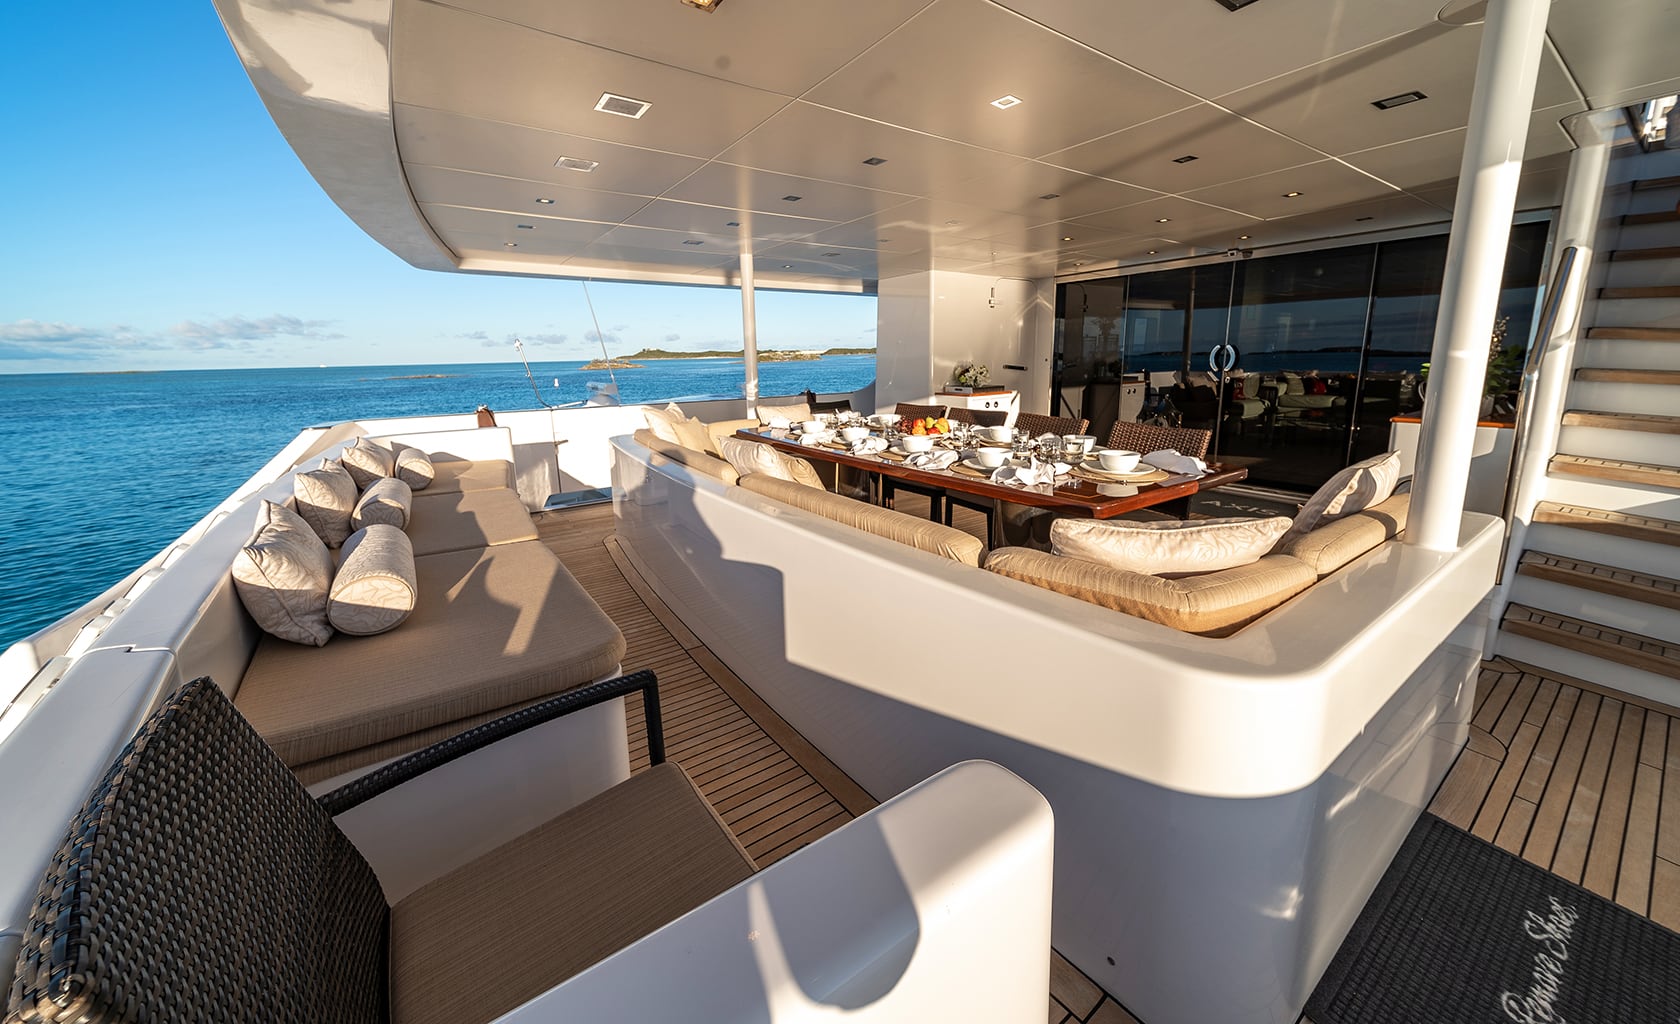 SEA AXIS Dining area on Aft deck